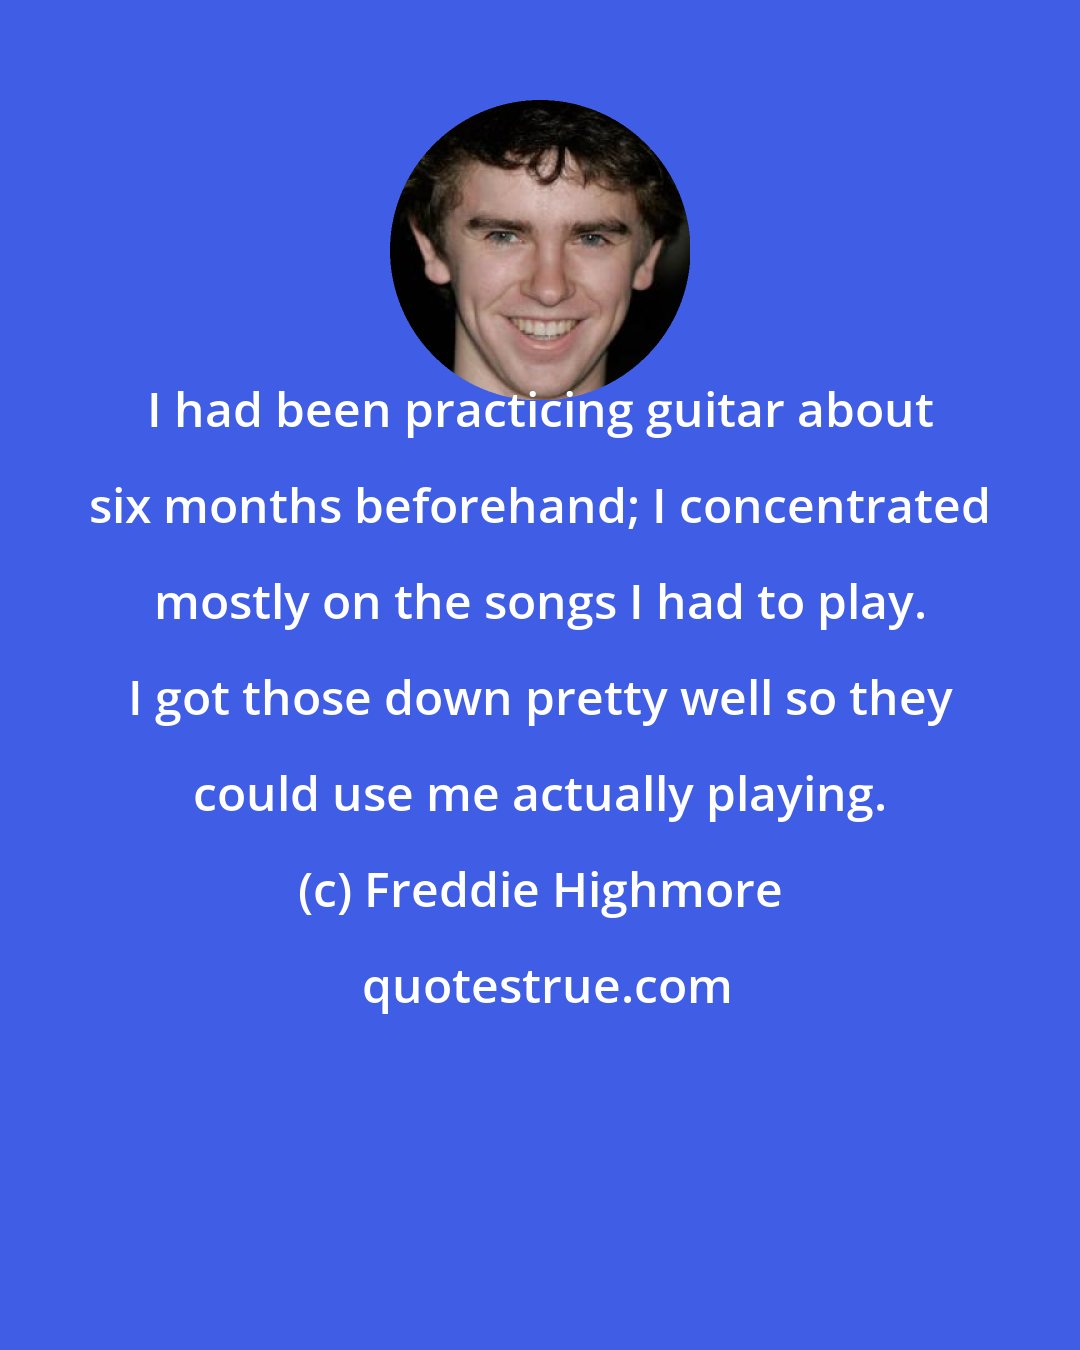 Freddie Highmore: I had been practicing guitar about six months beforehand; I concentrated mostly on the songs I had to play. I got those down pretty well so they could use me actually playing.